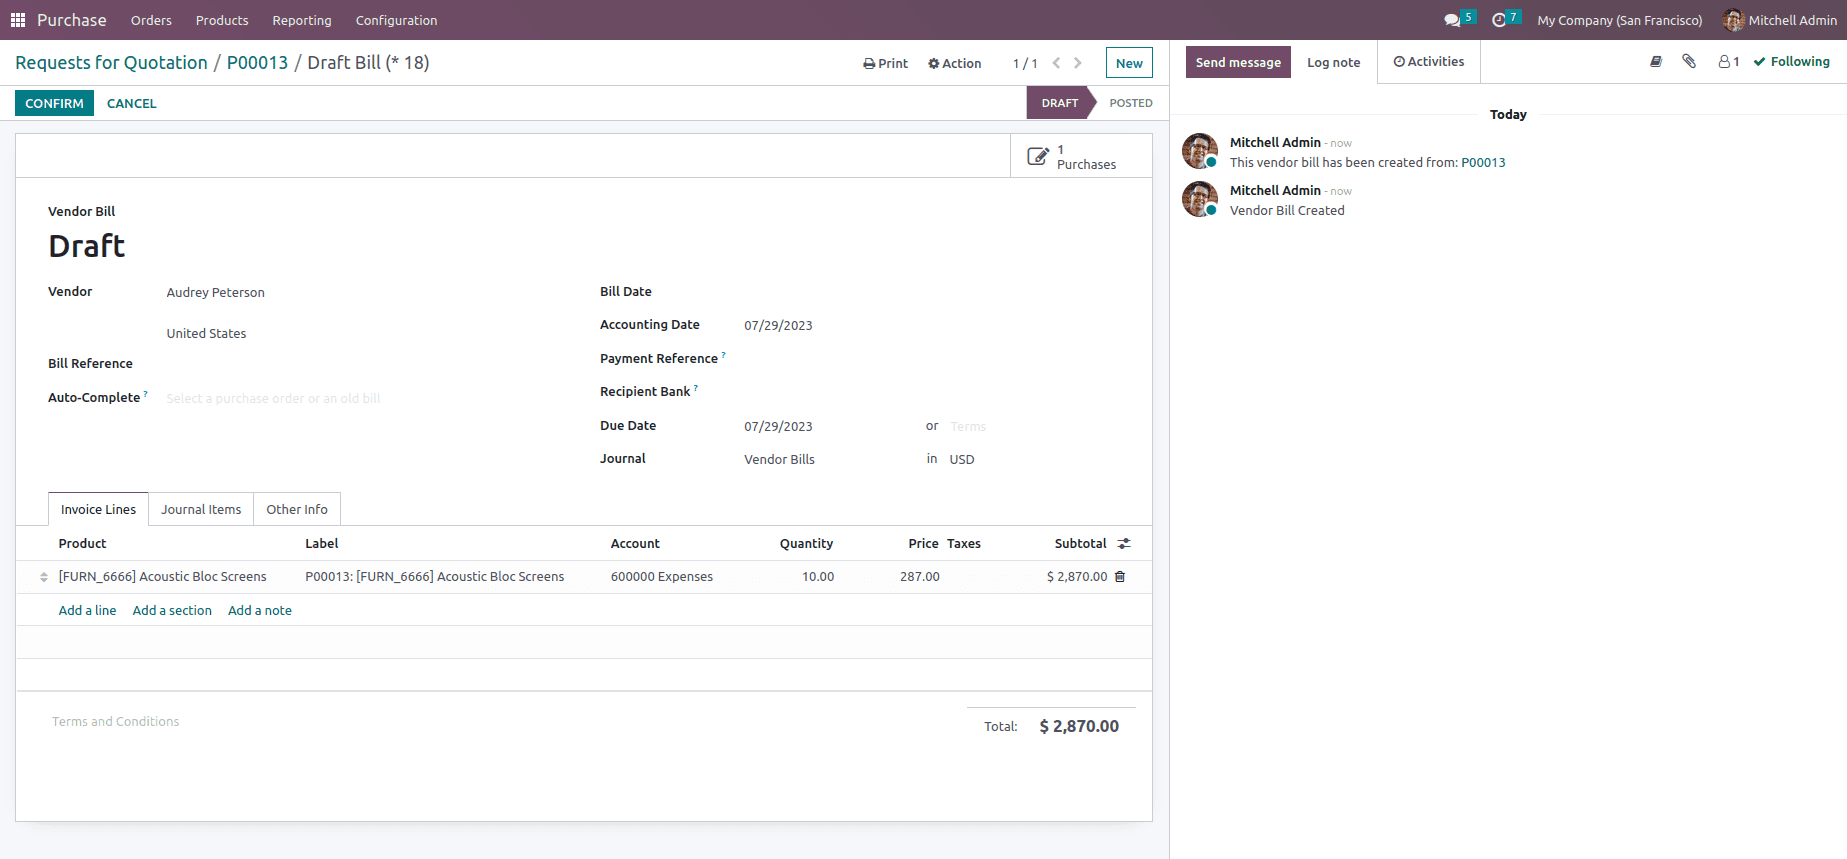 How Bill Control Policies Work in Odoo 16 Purchase App-cybrosys